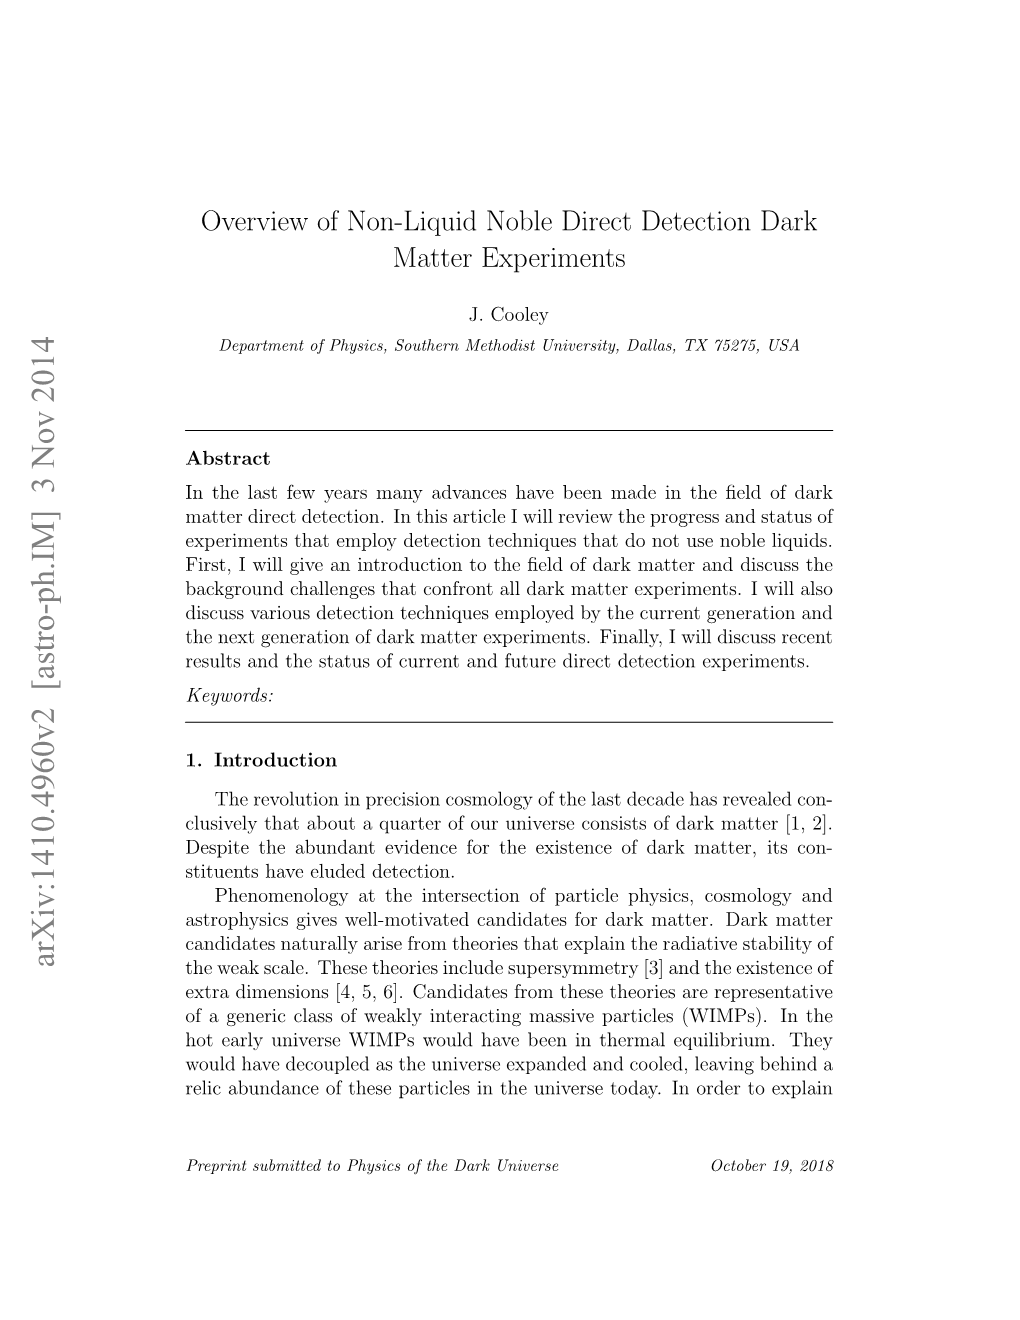 Overview of Non-Liquid Noble Direct Detection Dark Matter Experiments